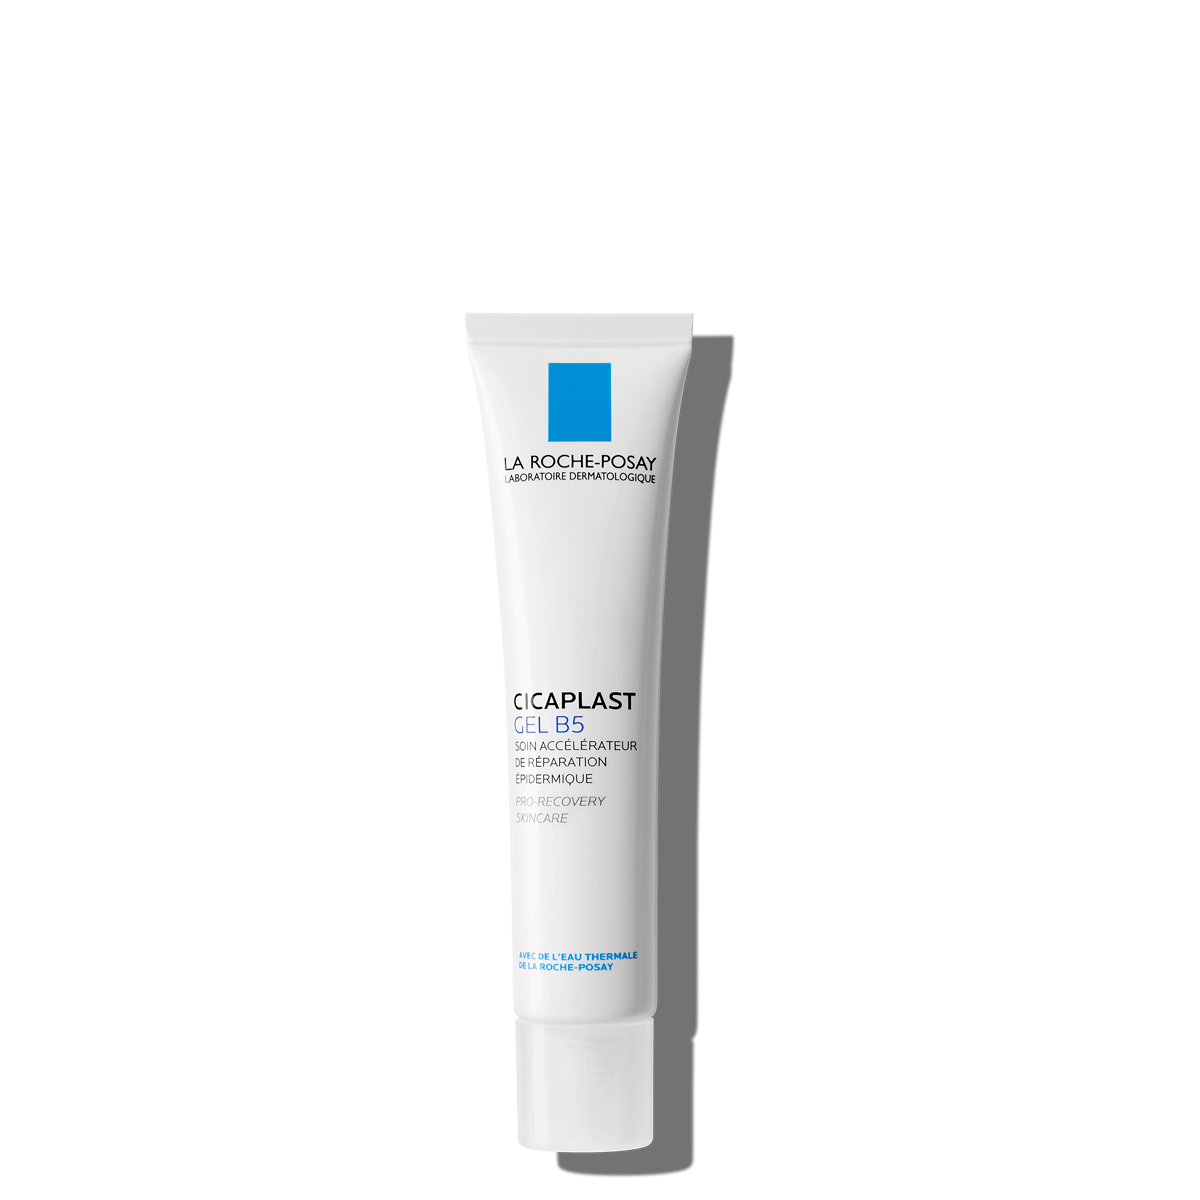 La Roche Posay ProductPage Damaged Cicaplast Gel B5 Pro Recovery 40ml 3337875586269 Front